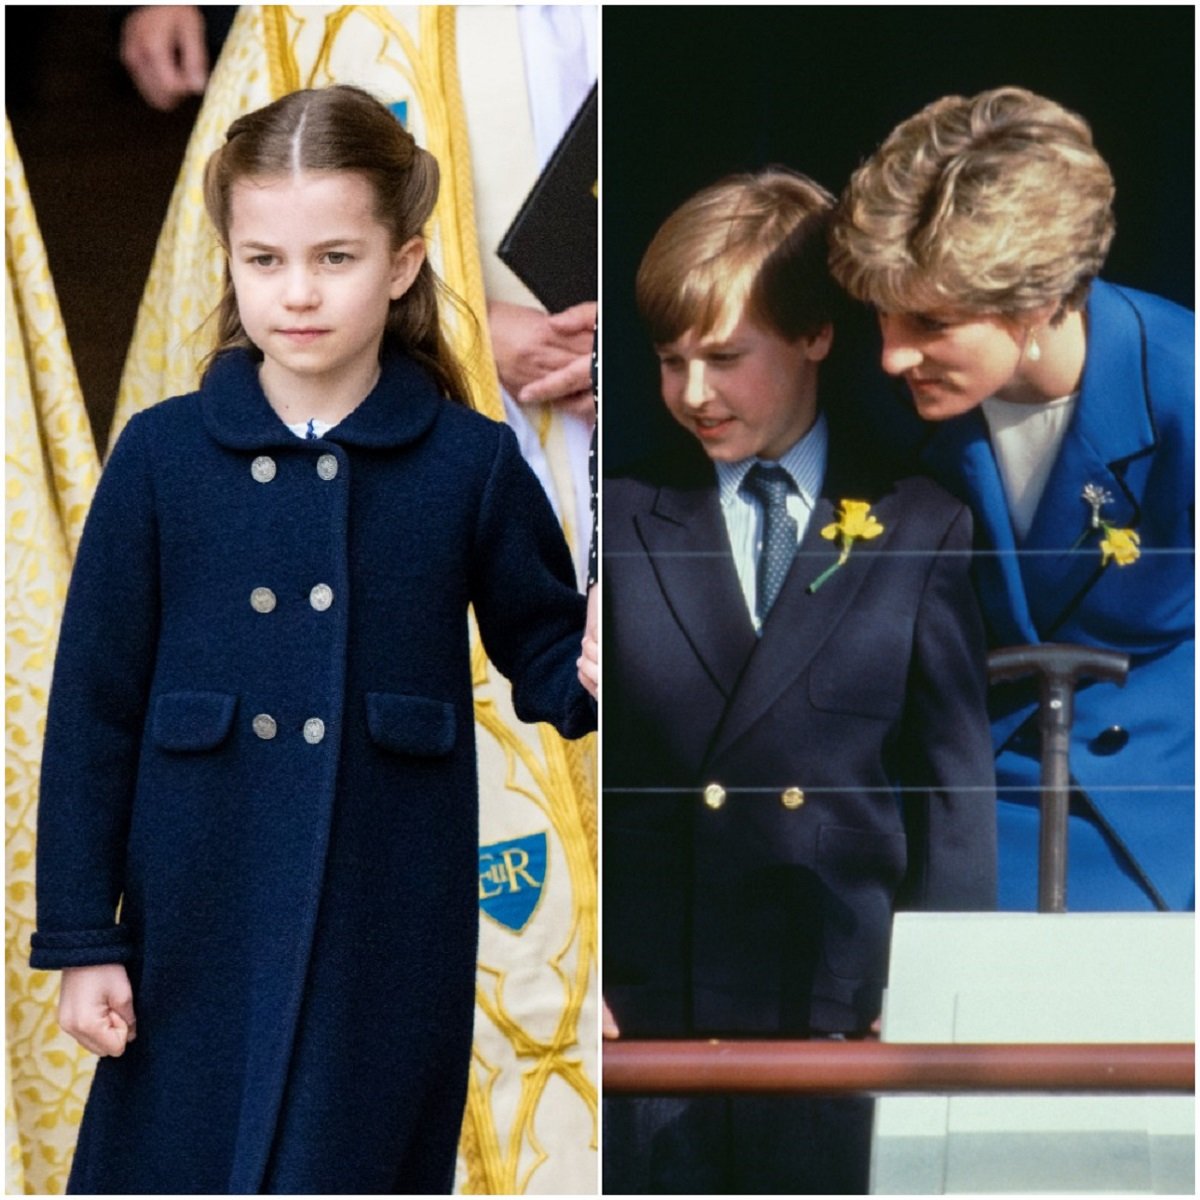 (L) Princess Charlotte, who wrote a Mother's Day letter to Princess Diana, at the memorial service for Prince Philip, (R) Princess Diana with Prince William on his first official engagement in 1991